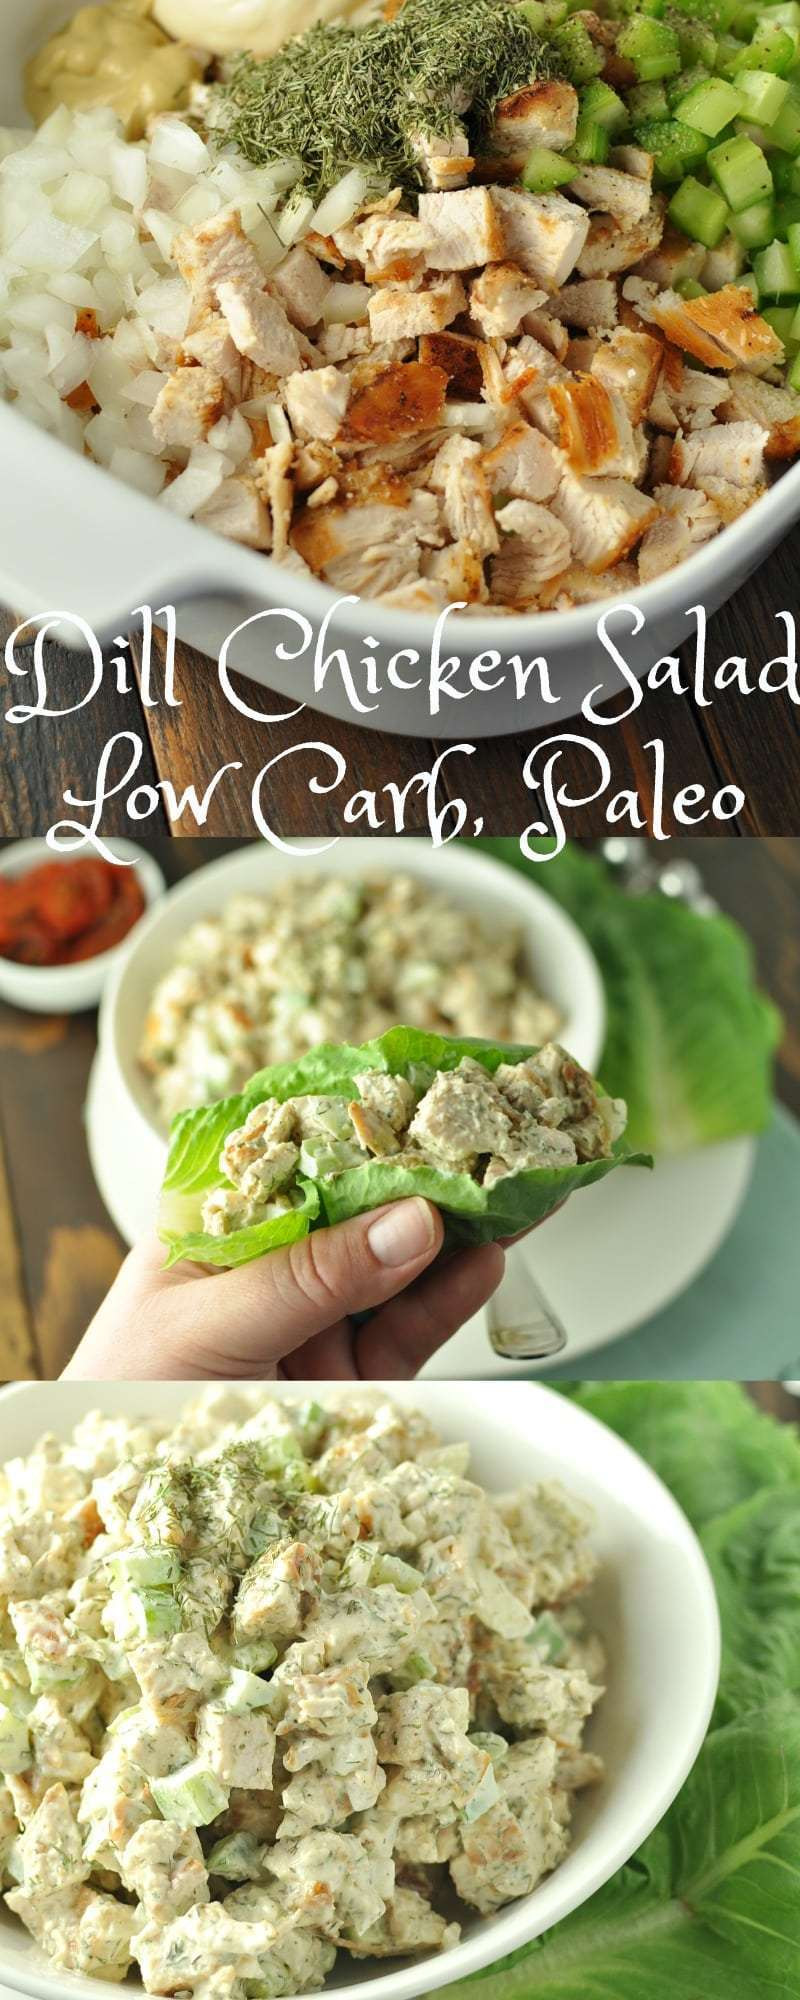 Low Carb Chicken Salad
 Dill Chicken Salad Low Carb Paleo